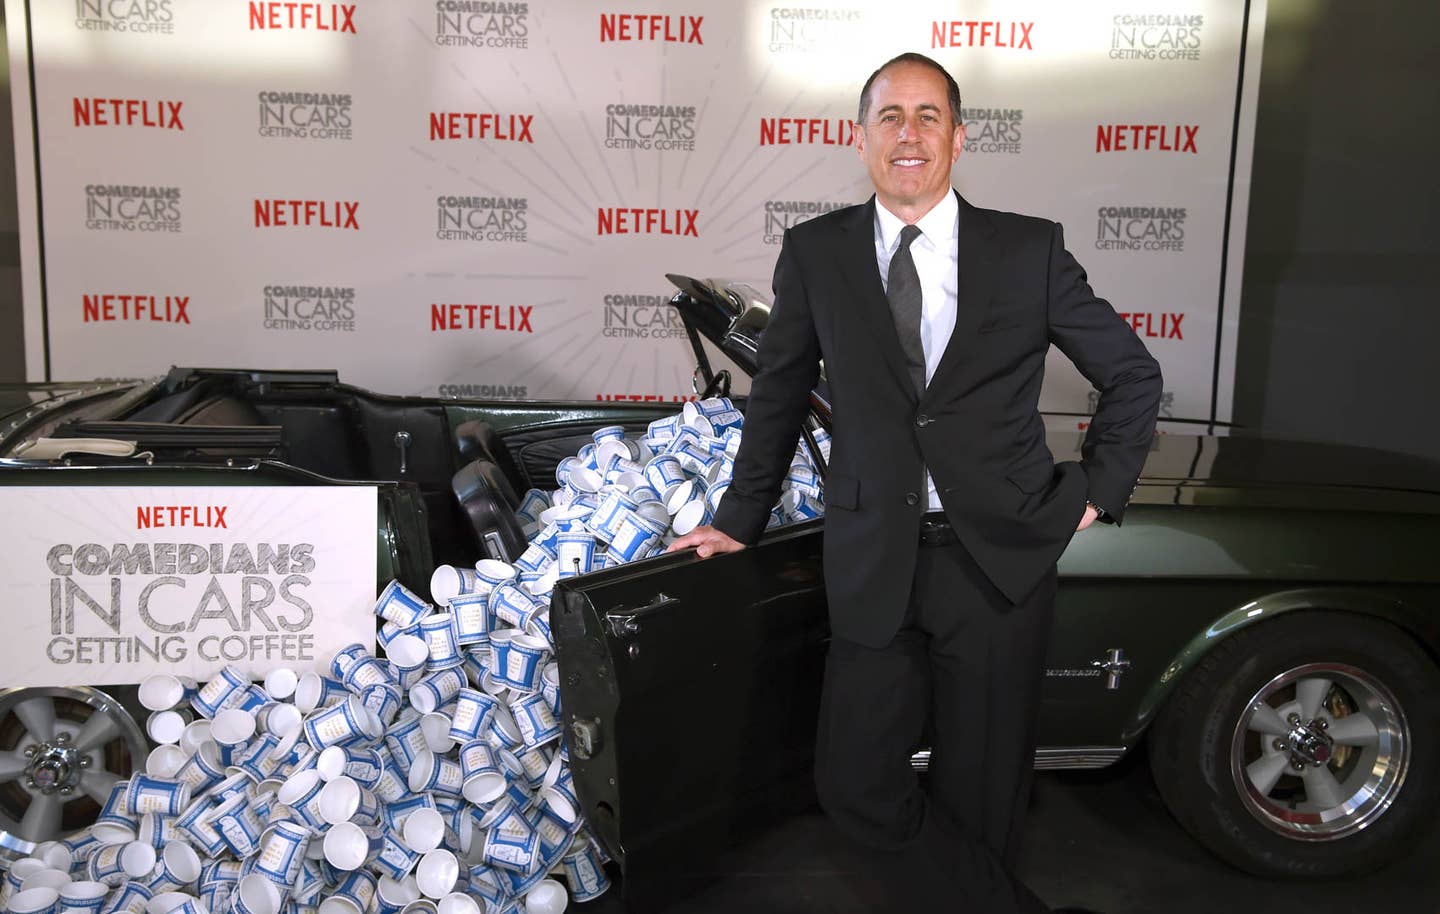 NEW YORK, NY - JUNE 25:  Jerry Seinfeld attends Comedians in Cars Getting Coffee - New York Event at Classic Car Club Manhattan on June 25, 2018 in New York City.  (Photo by Dimitrios Kambouris/Getty Images for Netflix)